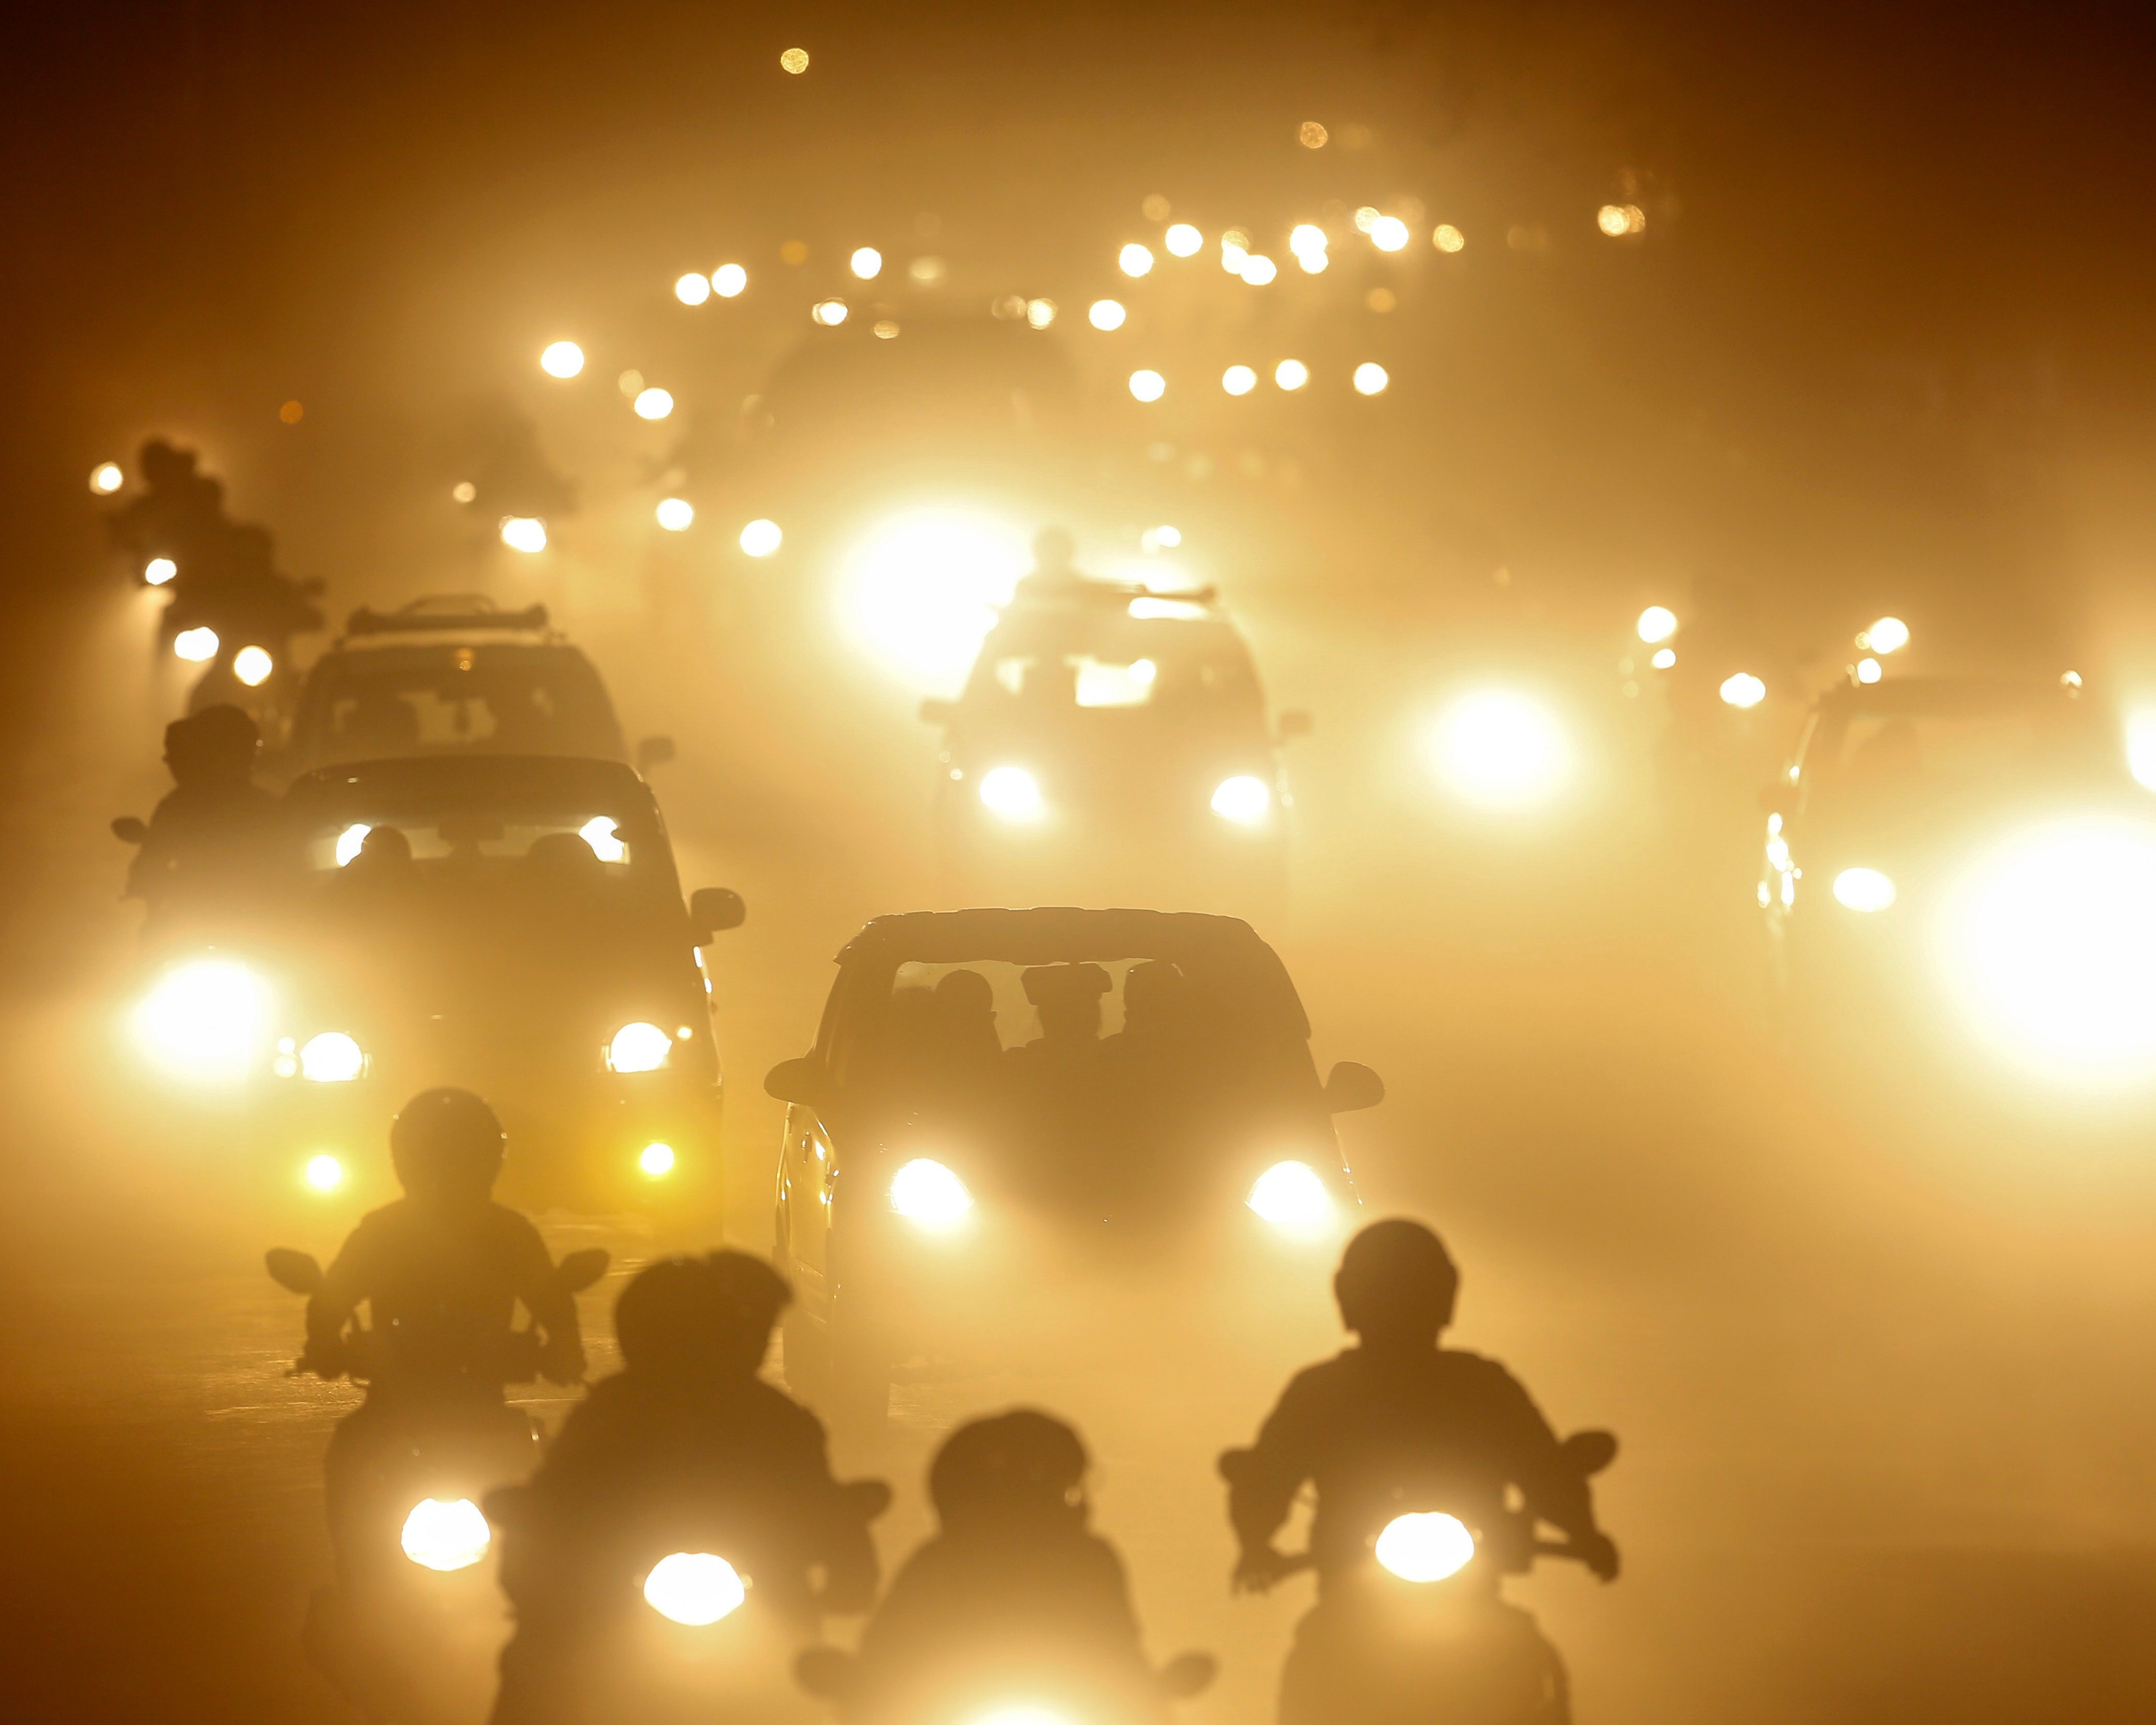 Vehicles run on the dusty road during night in Kathmandu, Nepal, 11 April 2017.  Air pollution is considered as the main causes of cancer and respiratory diseases in Nepal, media added quoting health experts.